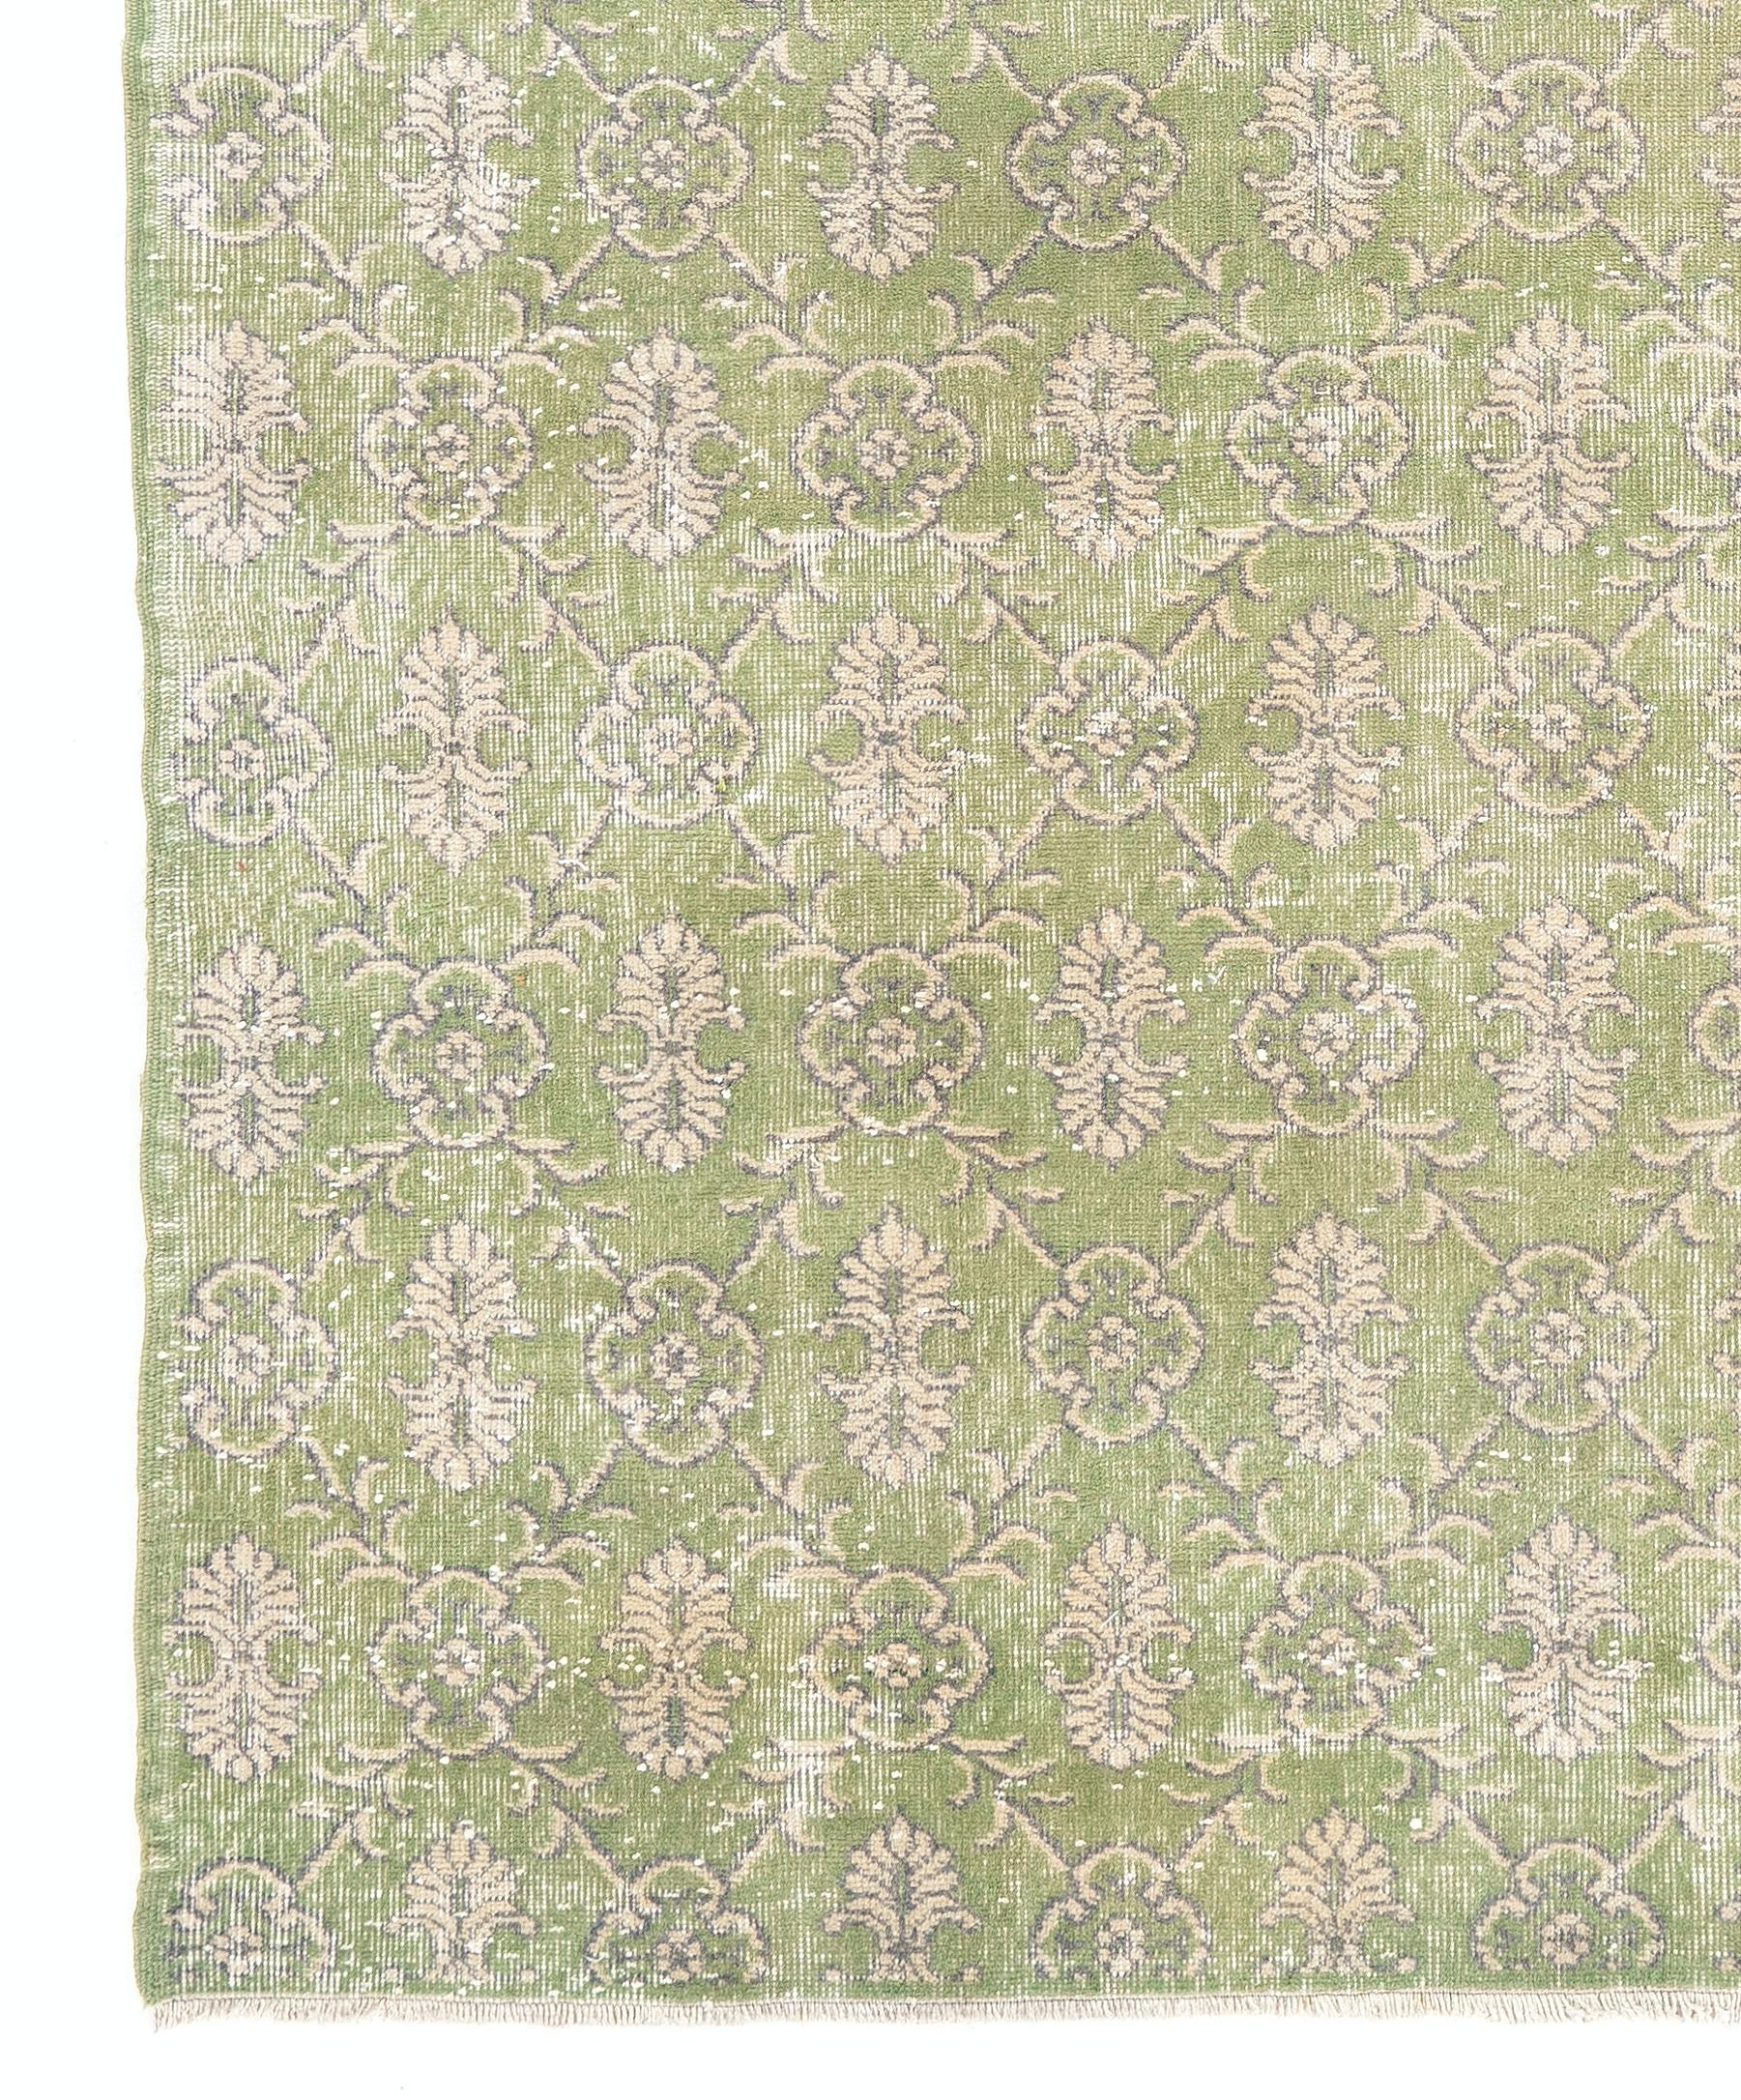 Hand-Woven 7.5x9 Ft Handmade Vintage Turkish Area Rug in Green with All-Over Floral Design